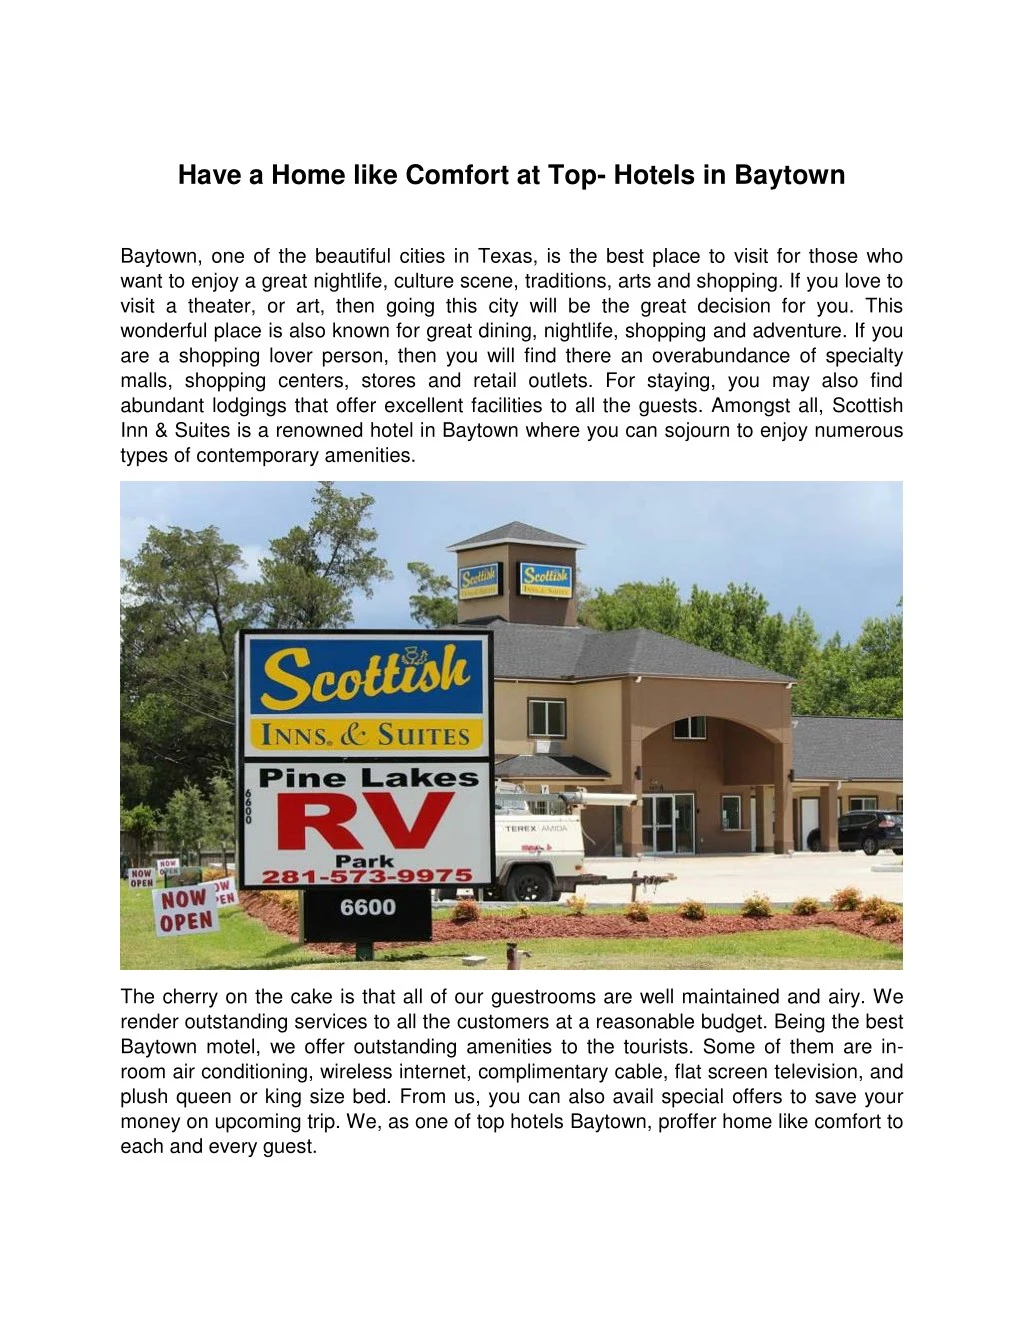 have a home like comfort at top hotels in baytown